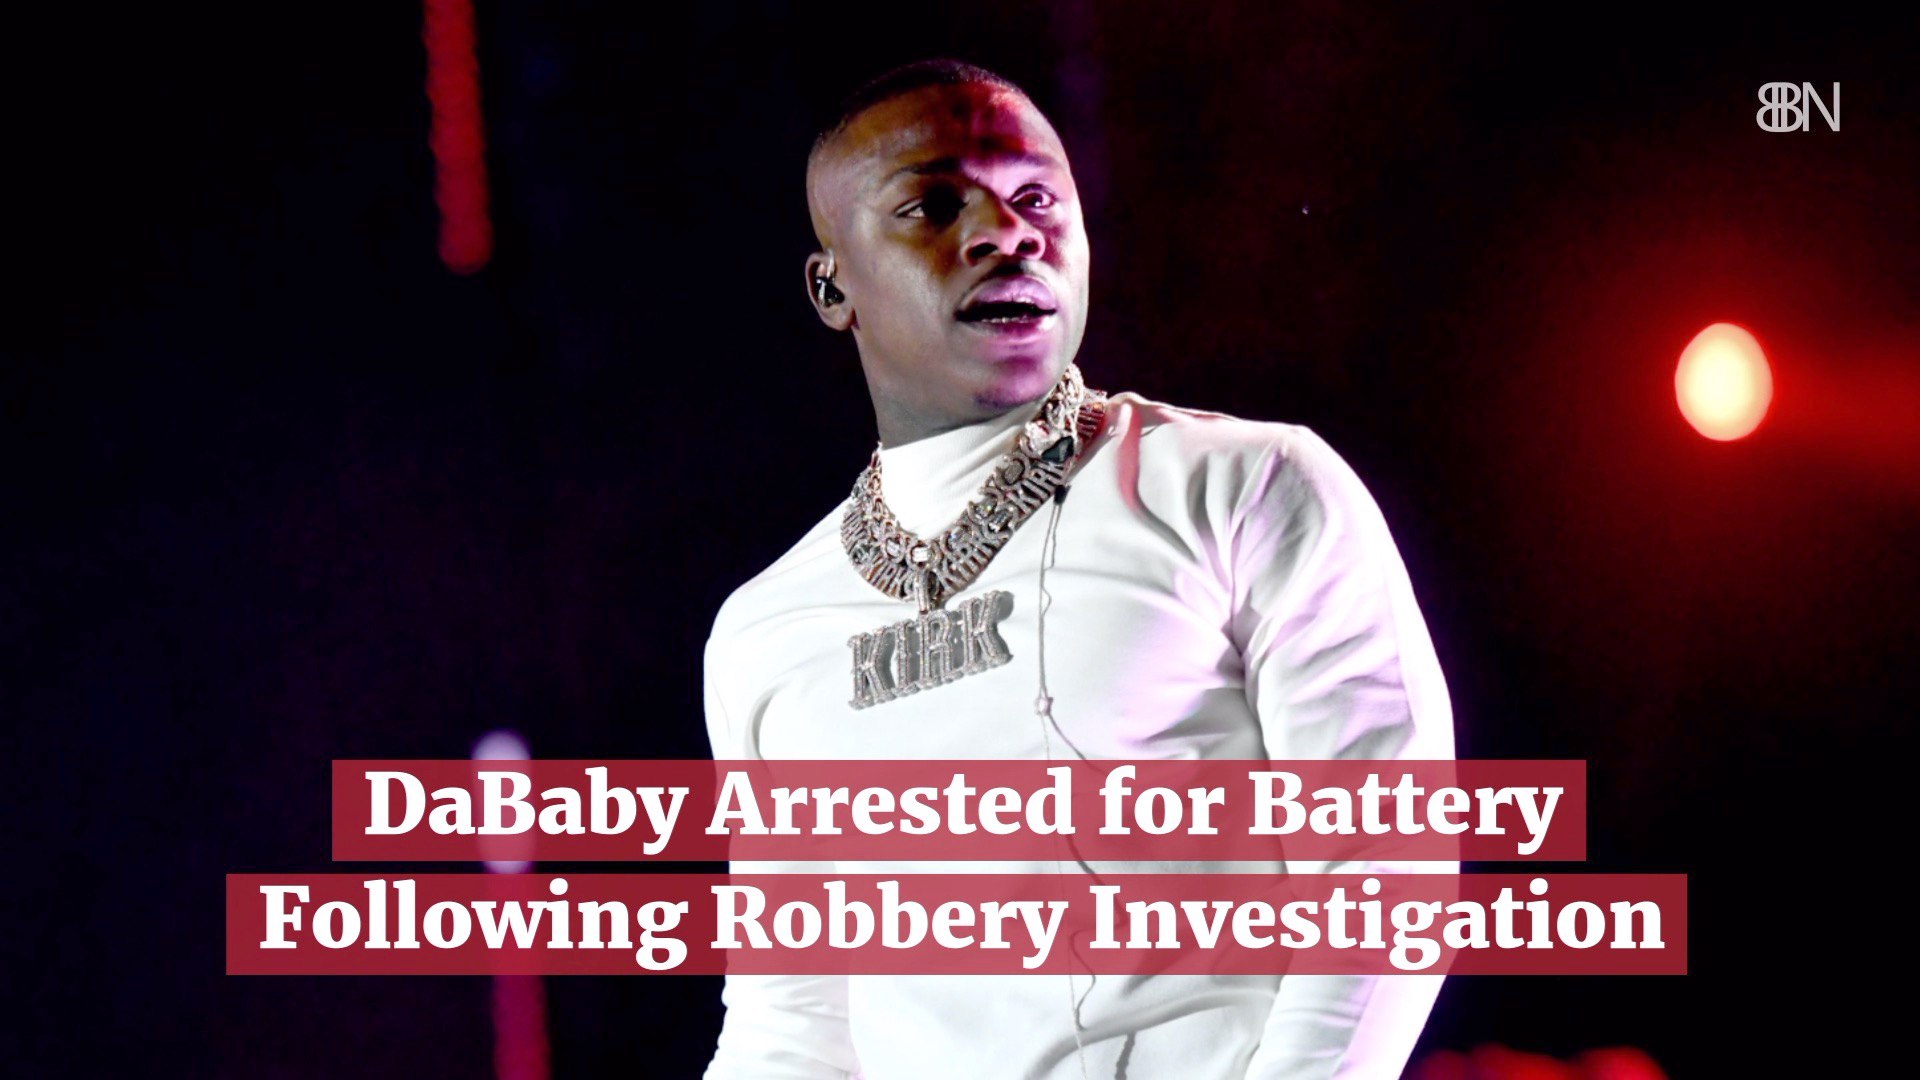 DaBaby Gets Into Big Trouble